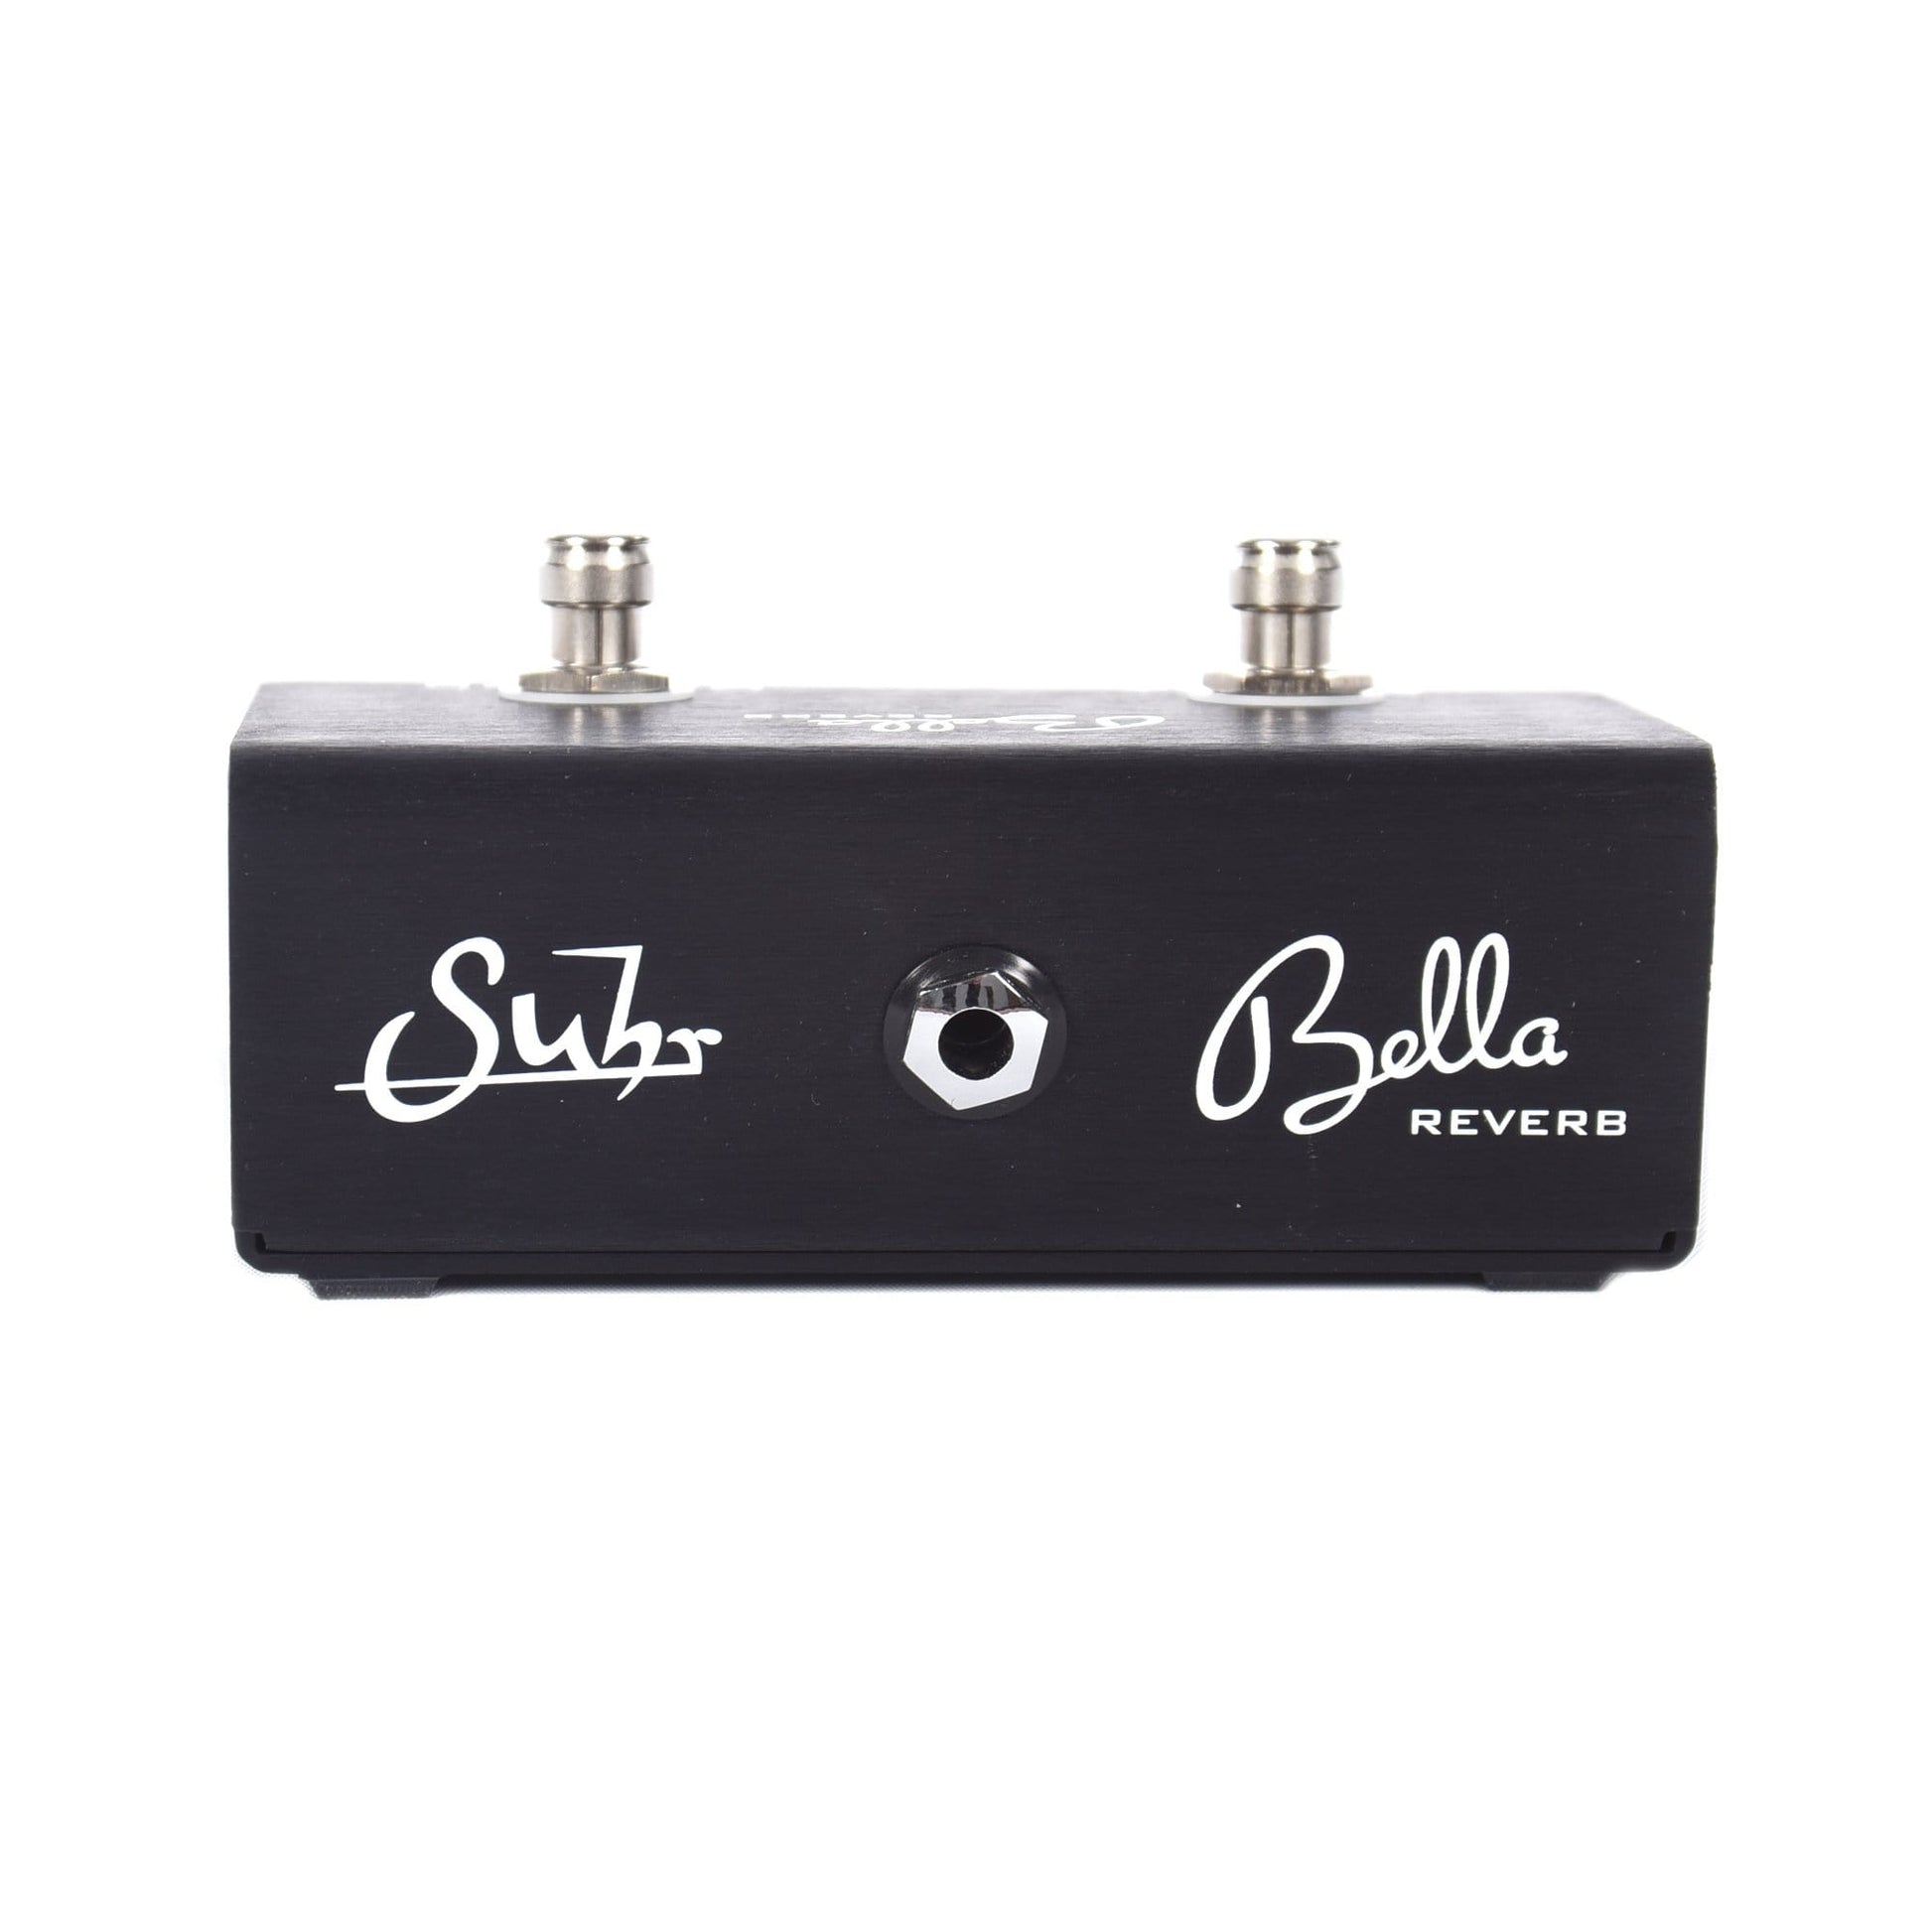 Suhr Bella Reverb Two-Button Footswitch Effects and Pedals / Controllers, Volume and Expression